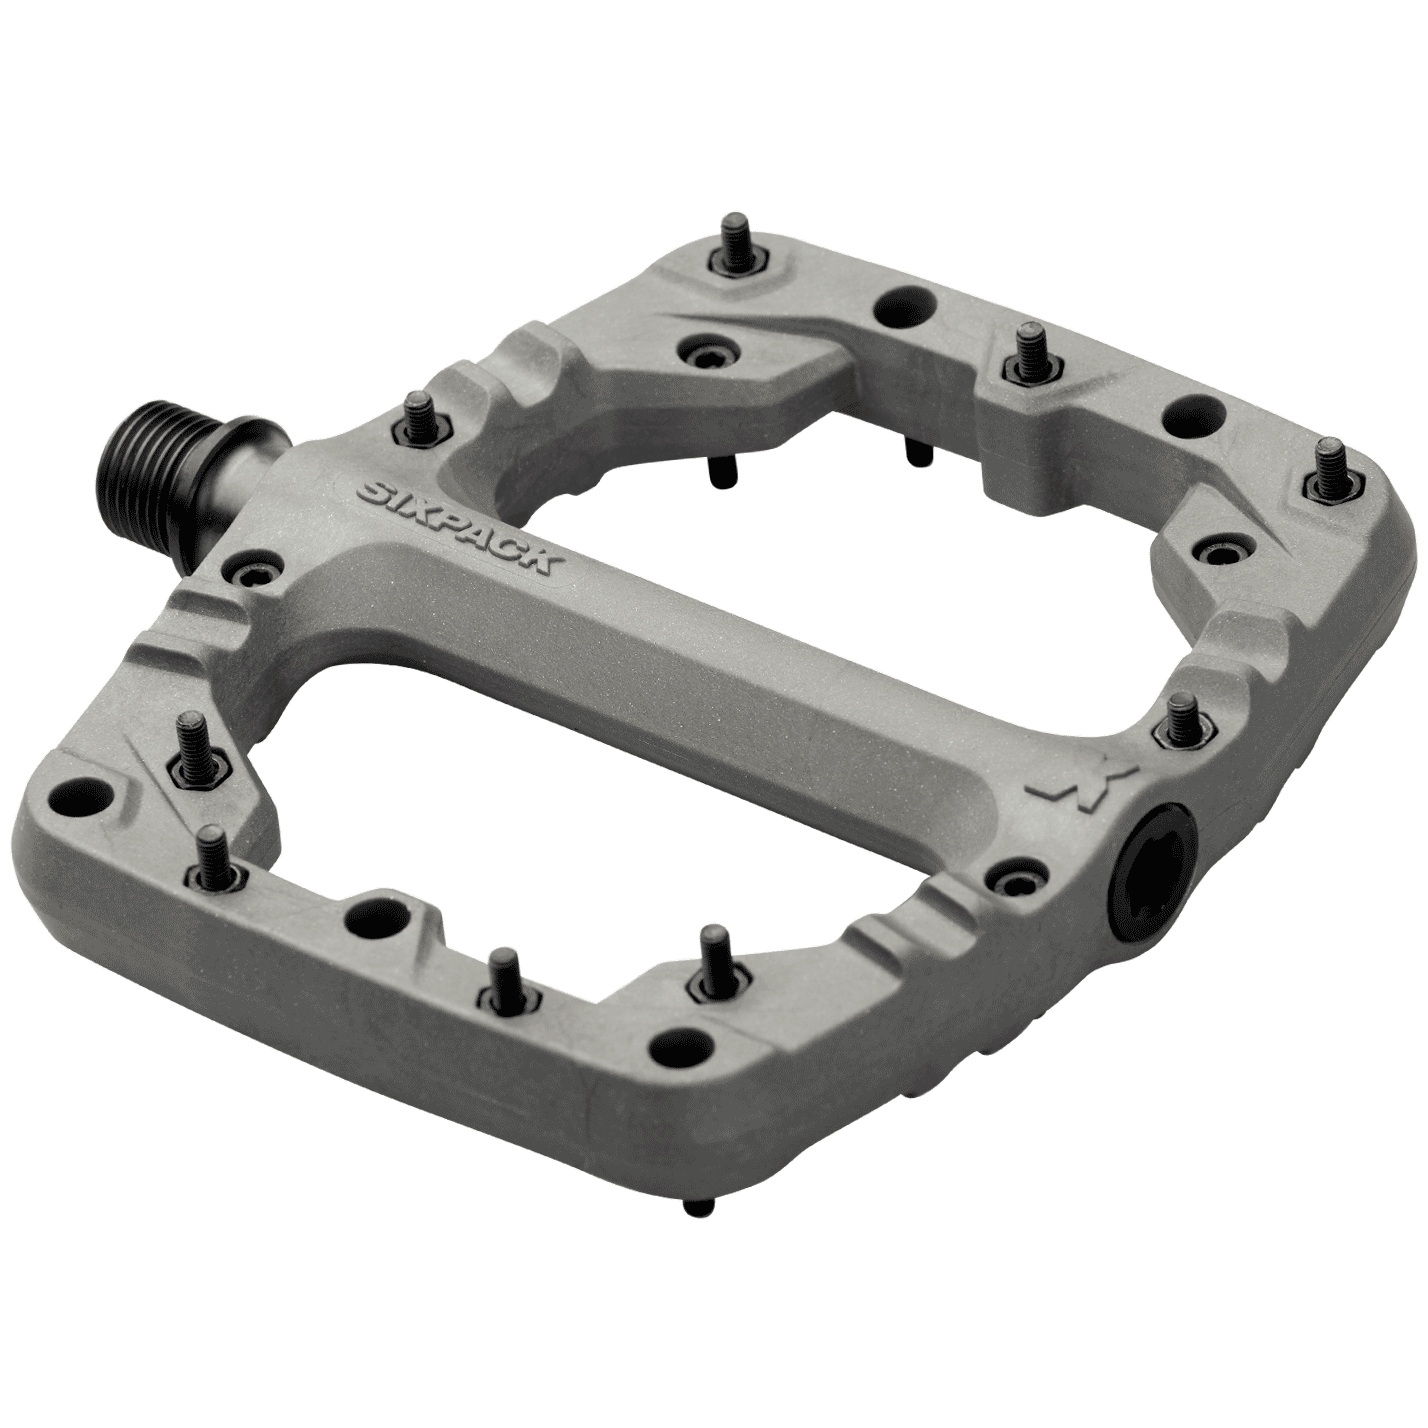 Picture of Sixpack Kamikaze PA Flat Pedals - steel grey